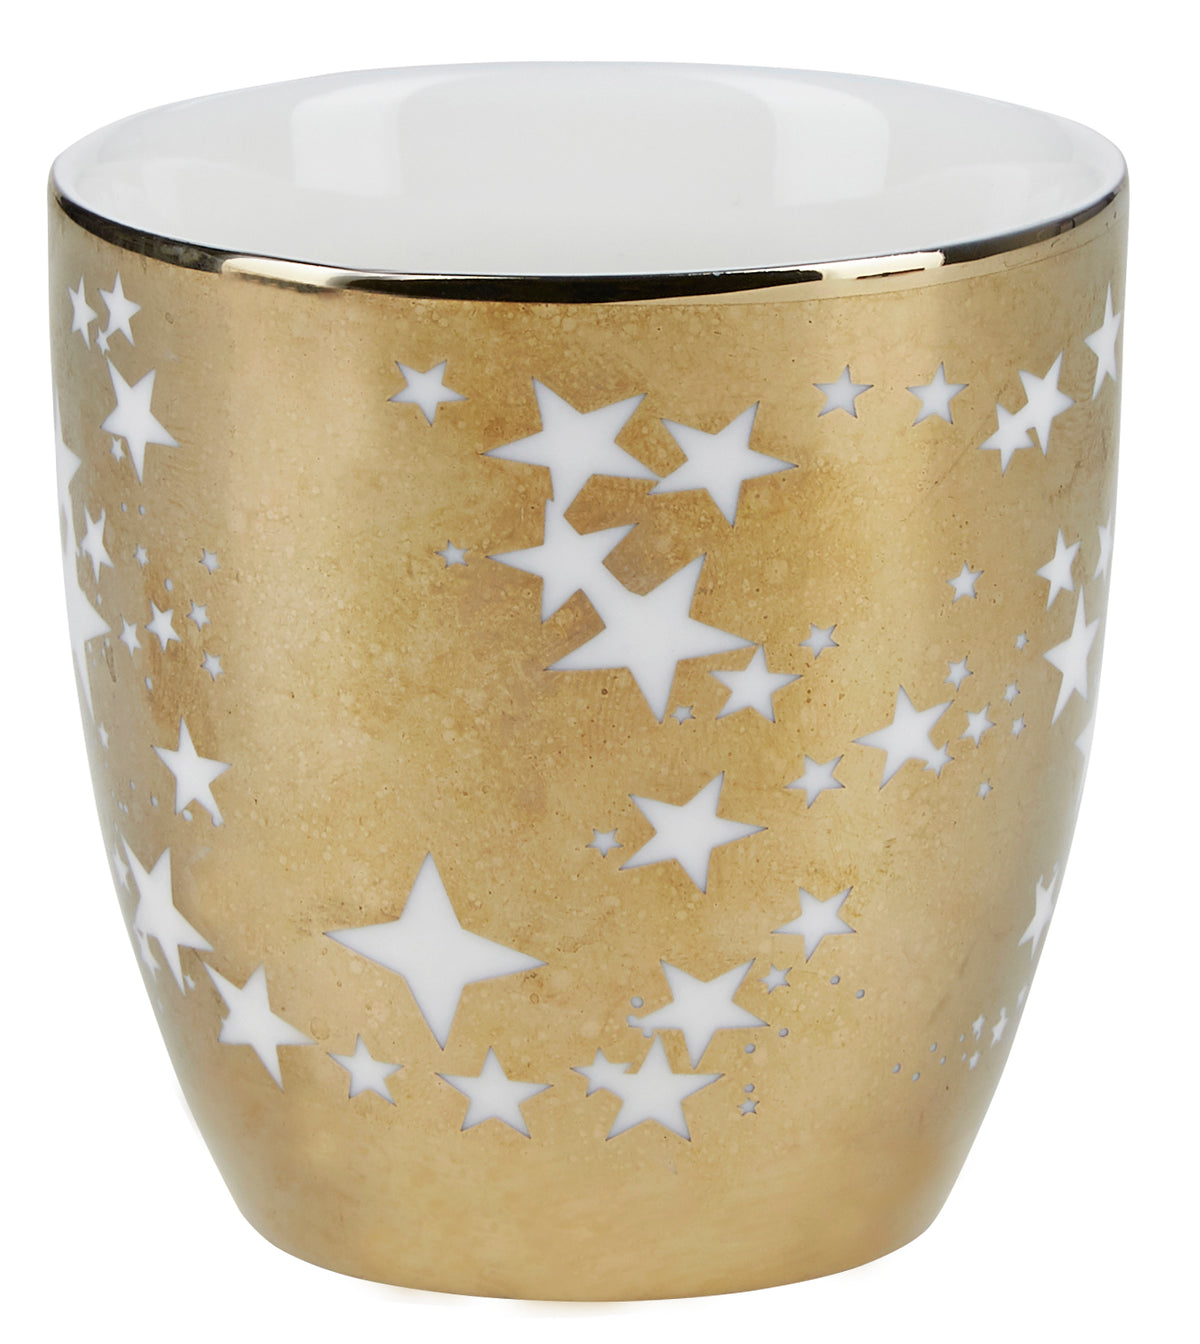 Miss Etoile Star Candle Holder - Set of 2